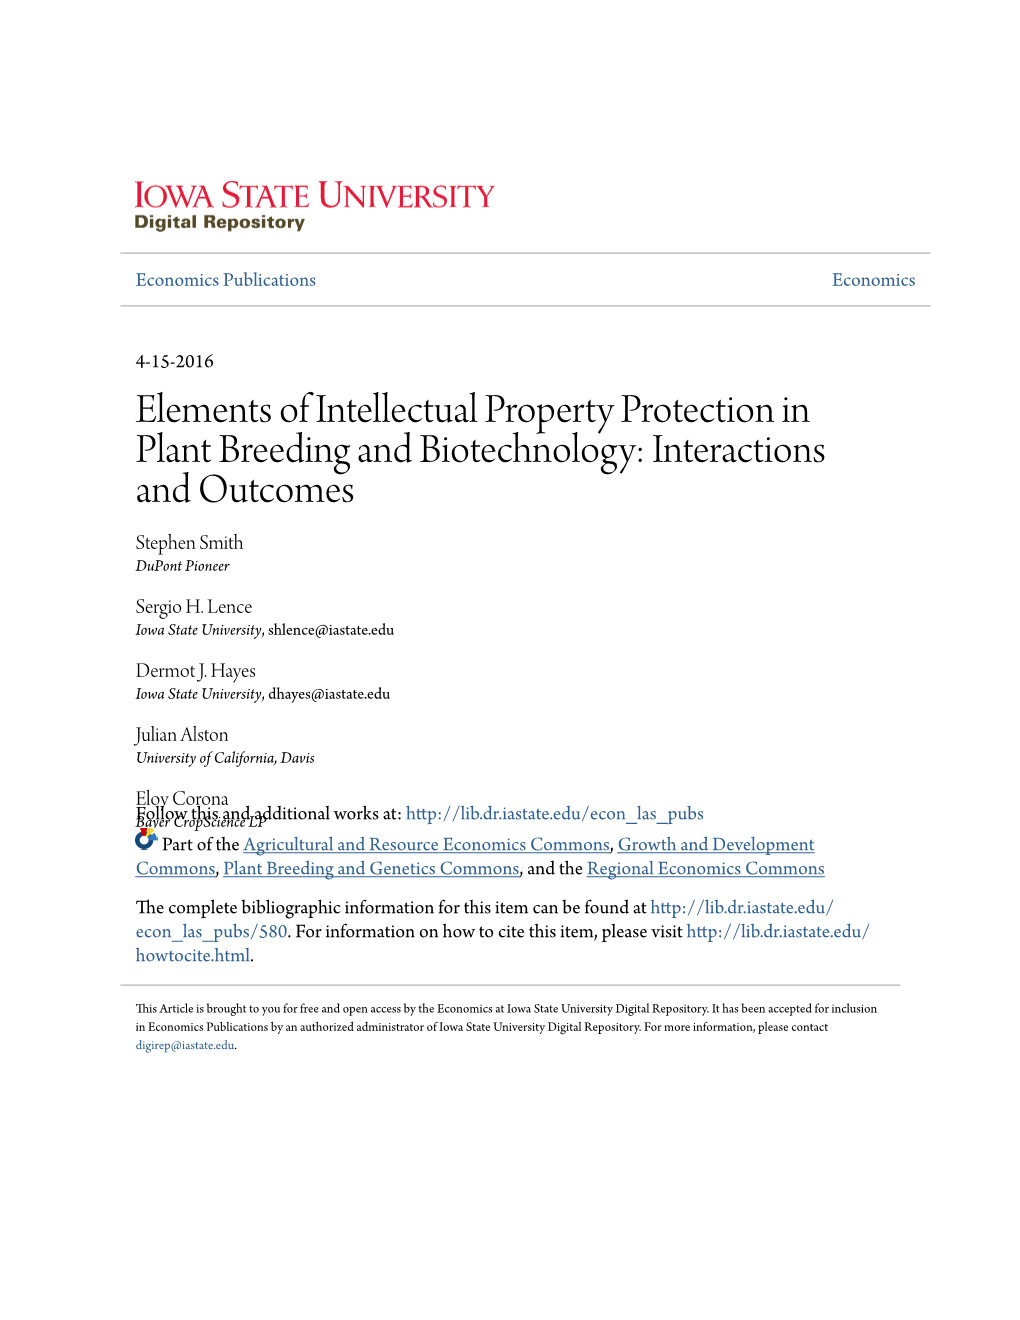 Elements of Intellectual Property Protection in Plant Breeding and Biotechnology: Interactions and Outcomes Stephen Smith Dupont Pioneer